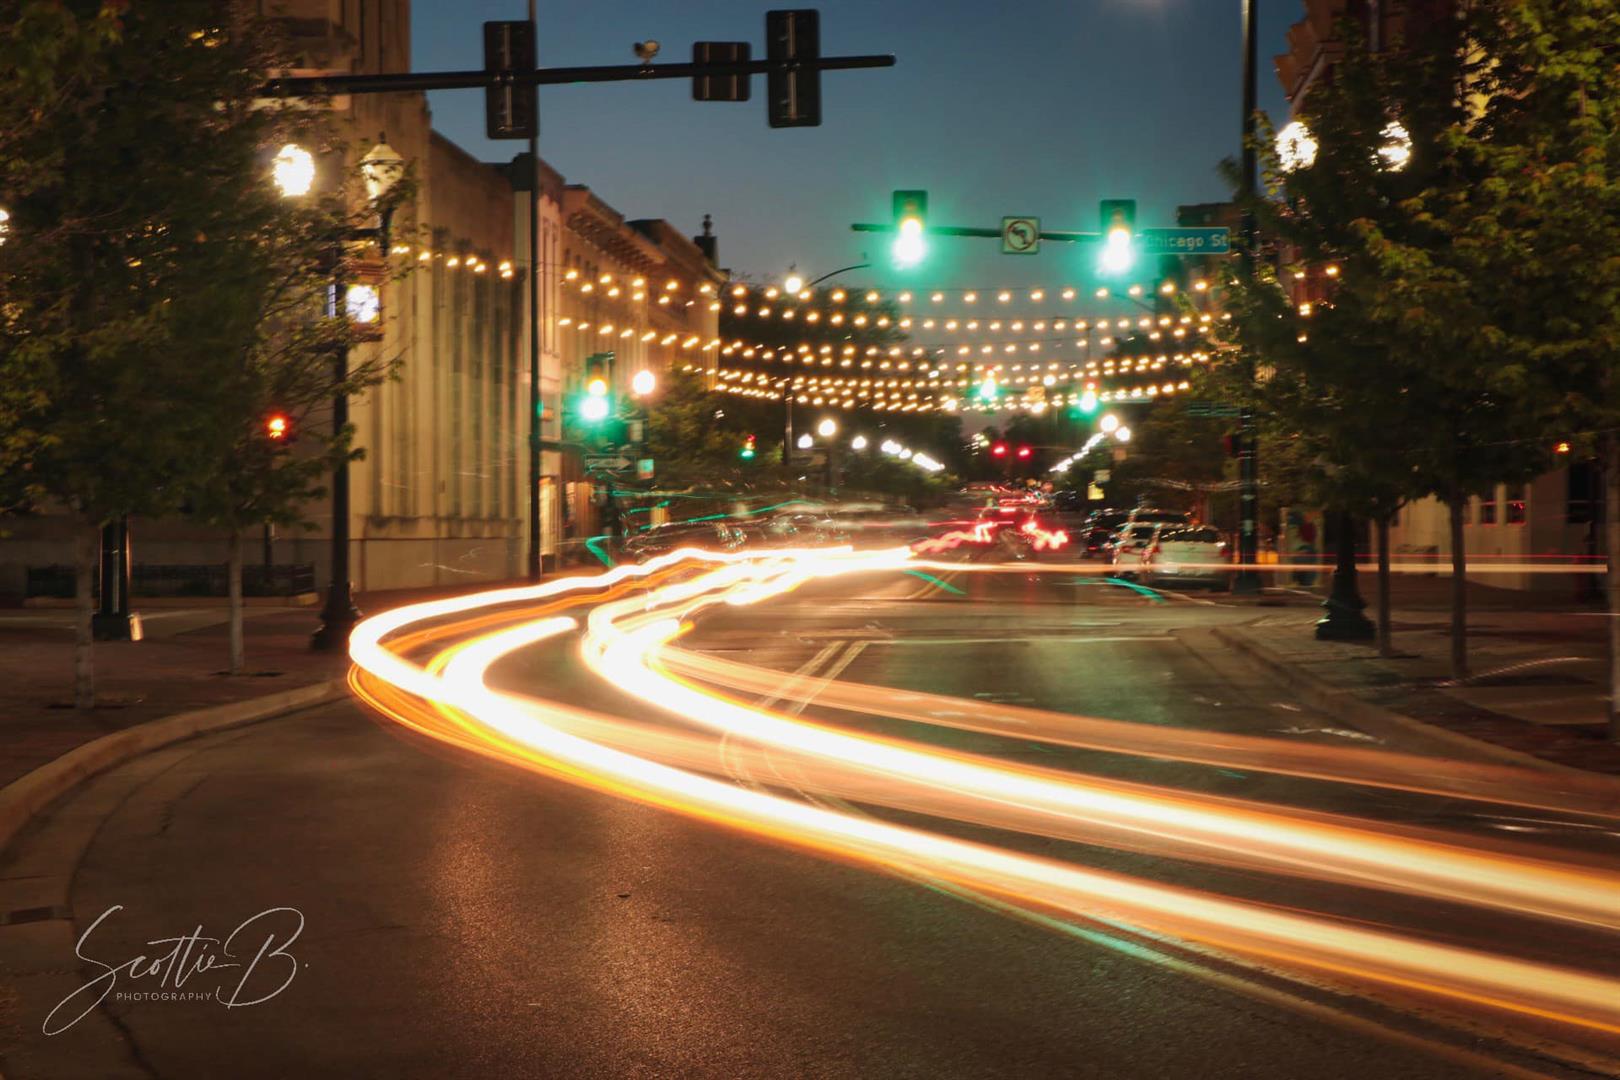 Downtown Elgin - Photo by Scottie B. Photography